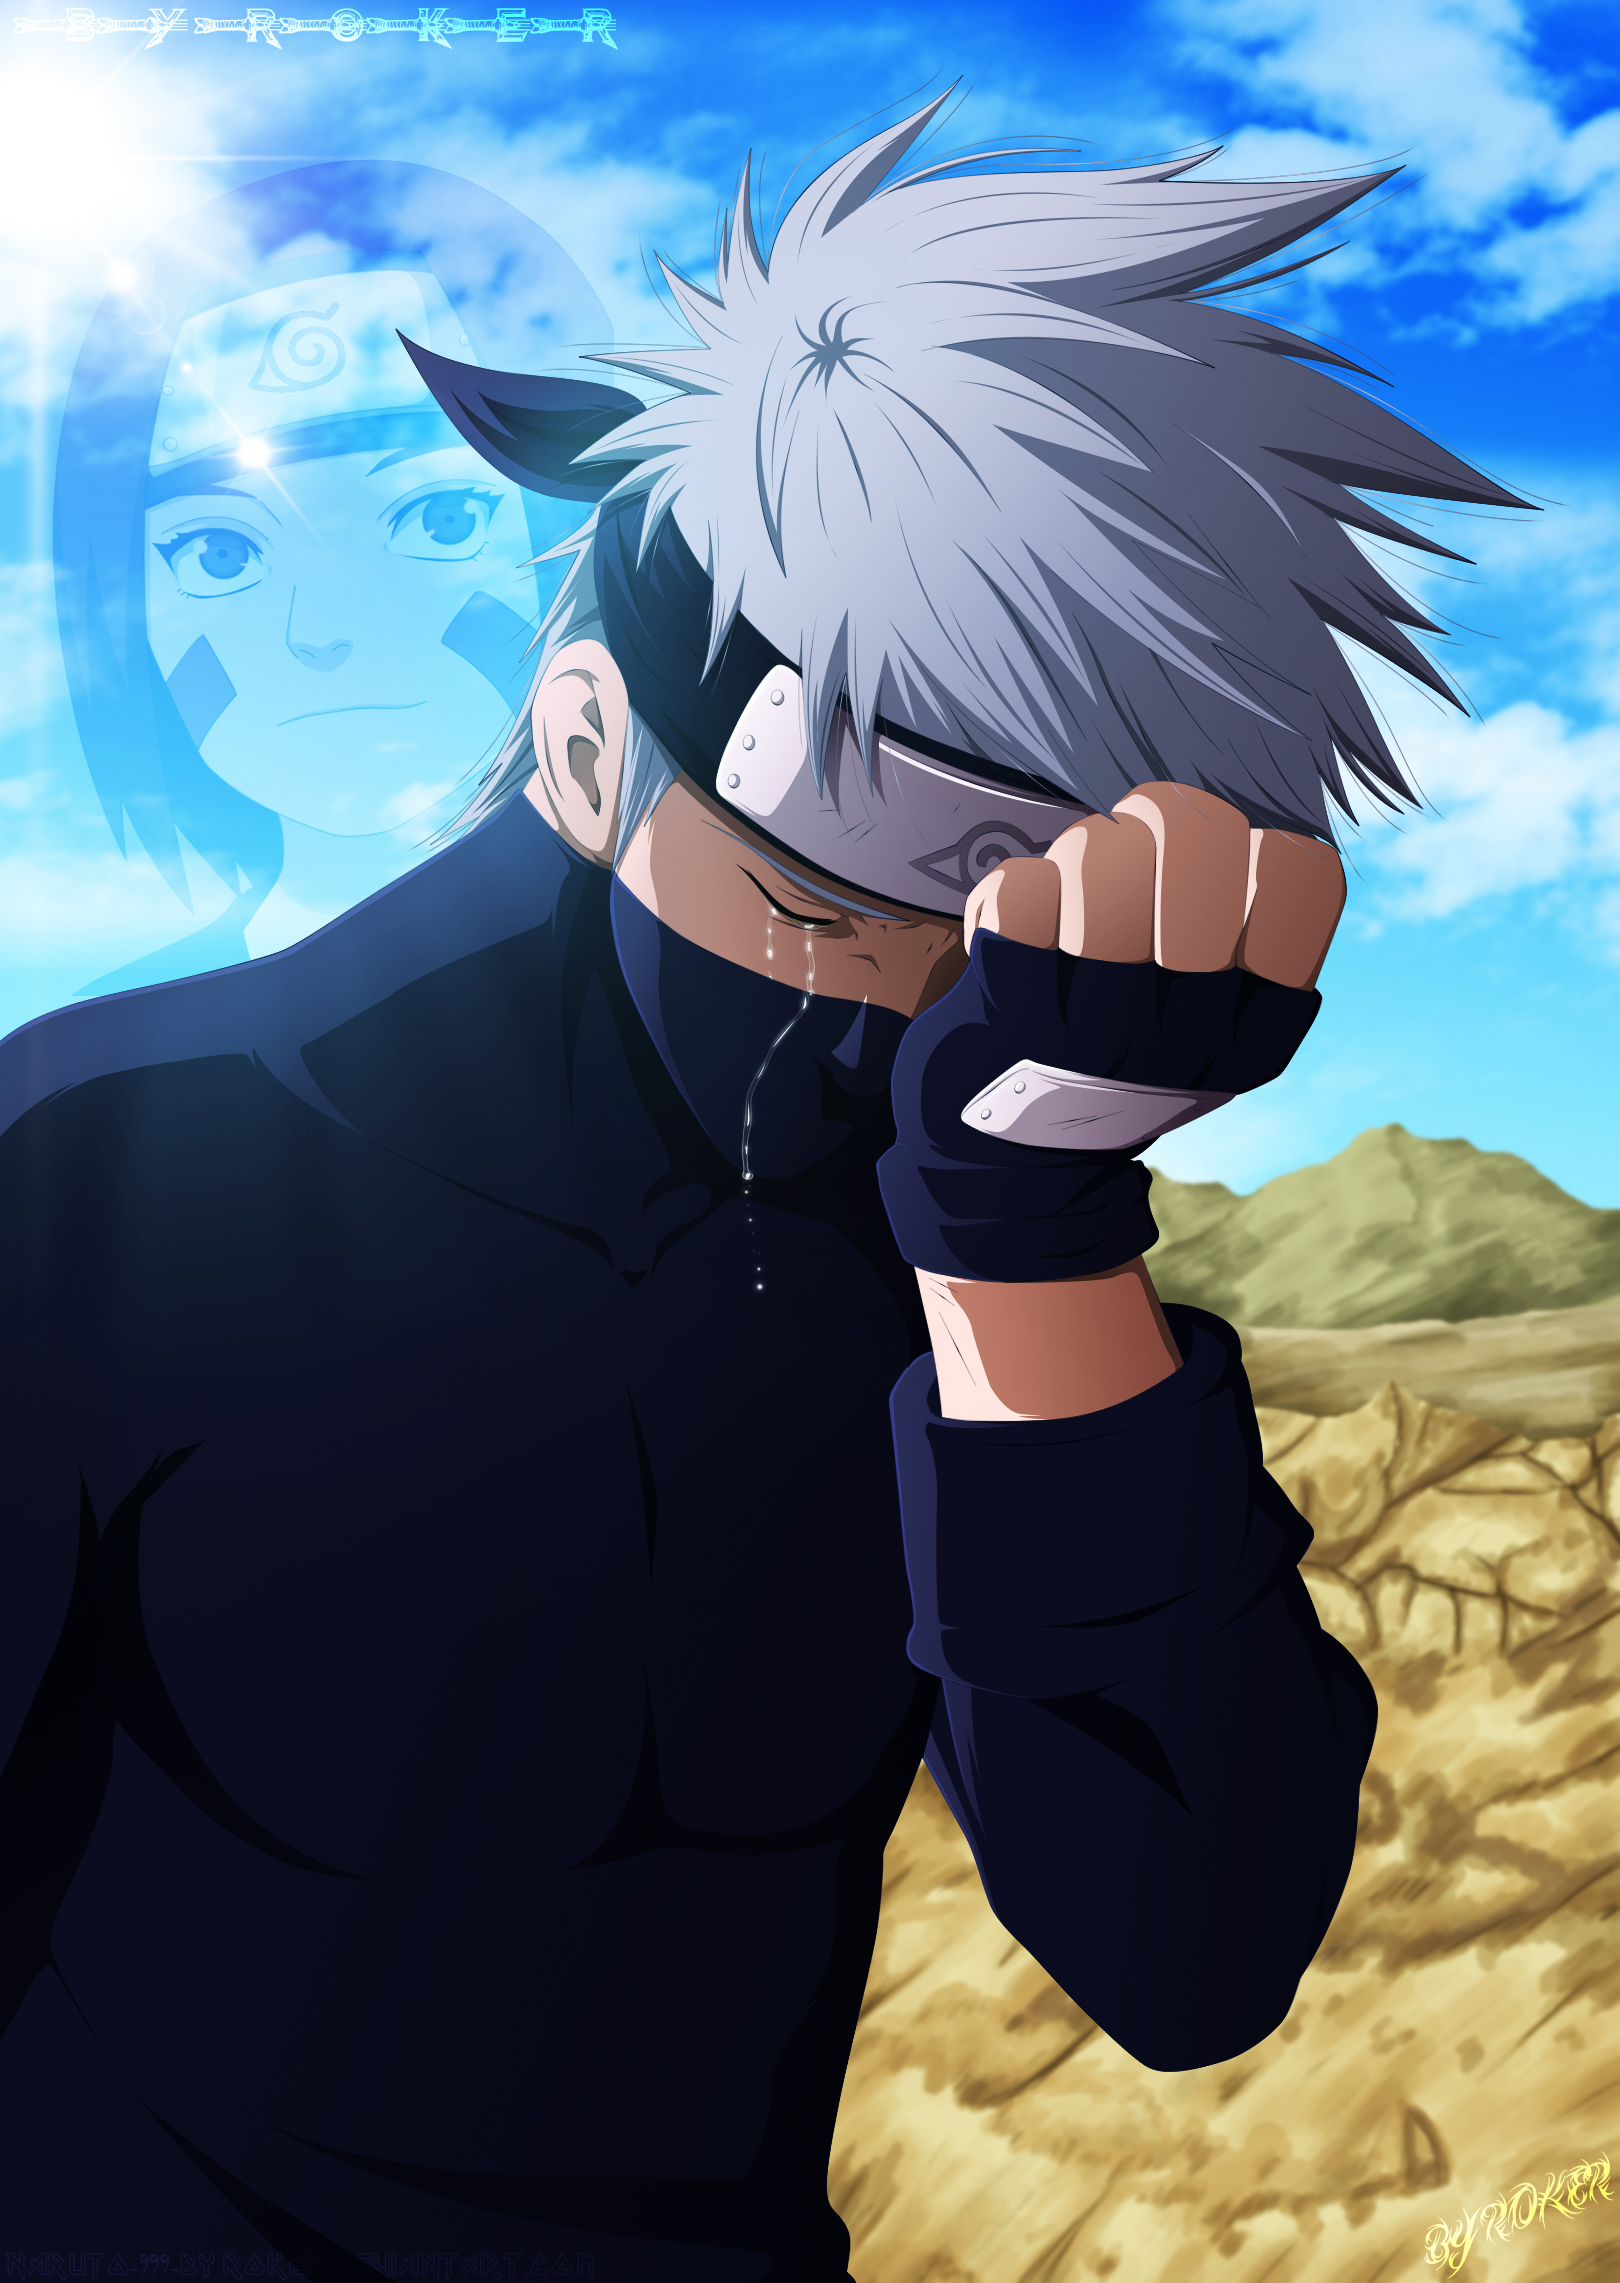 91 Kakashi Hatake Wallpapers for iPhone and Android by Paul Tate